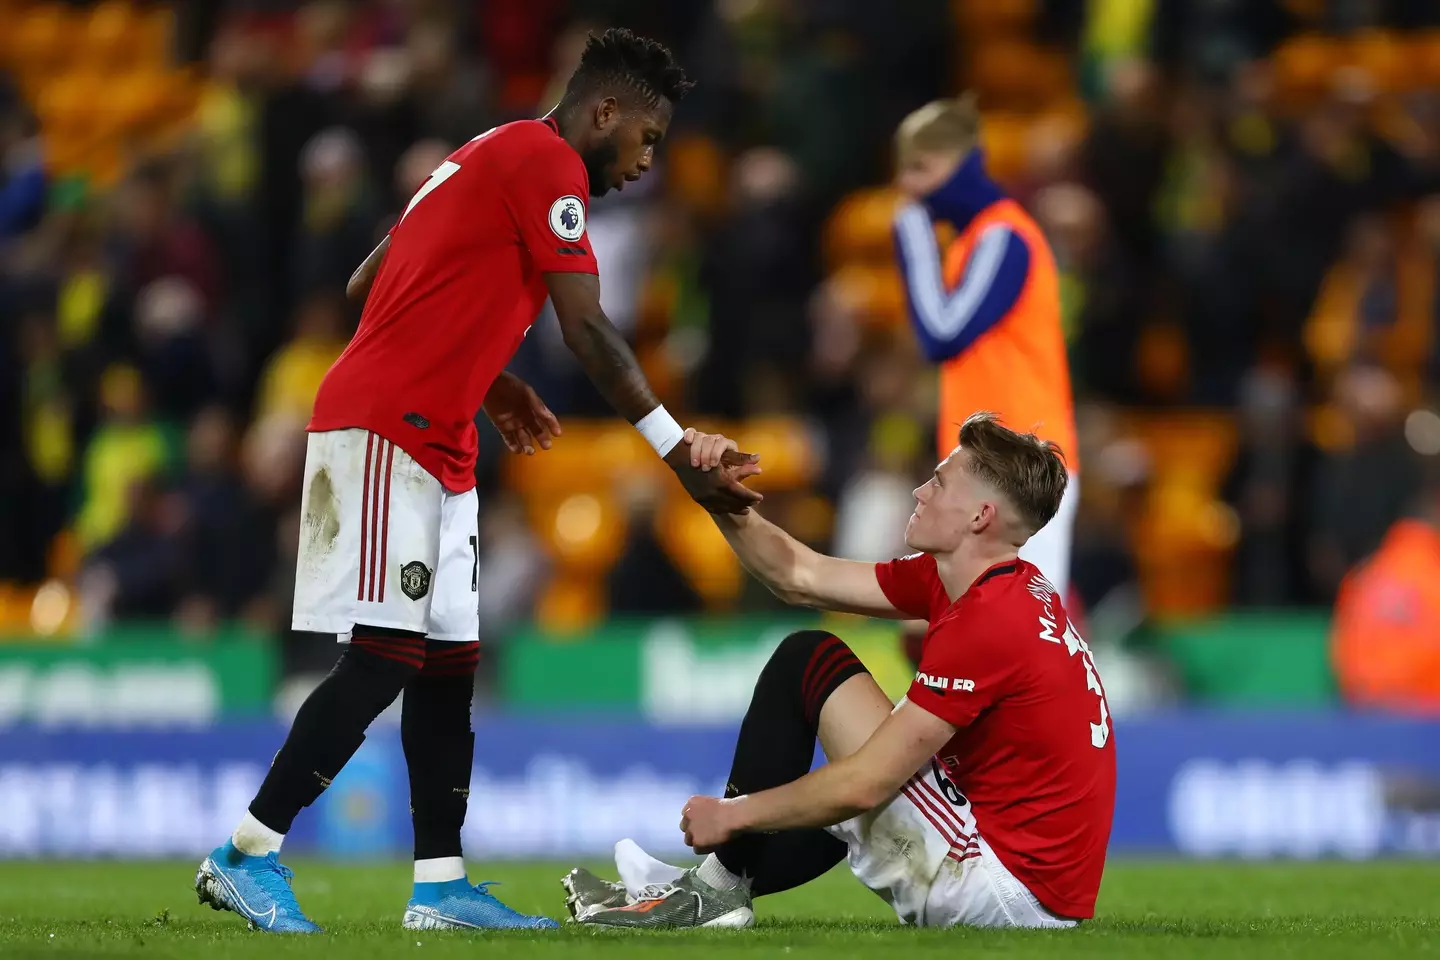 Fred and Scott McTominay have formed a partnership in midfield in recent seasons for Manchester United. (Alamy)